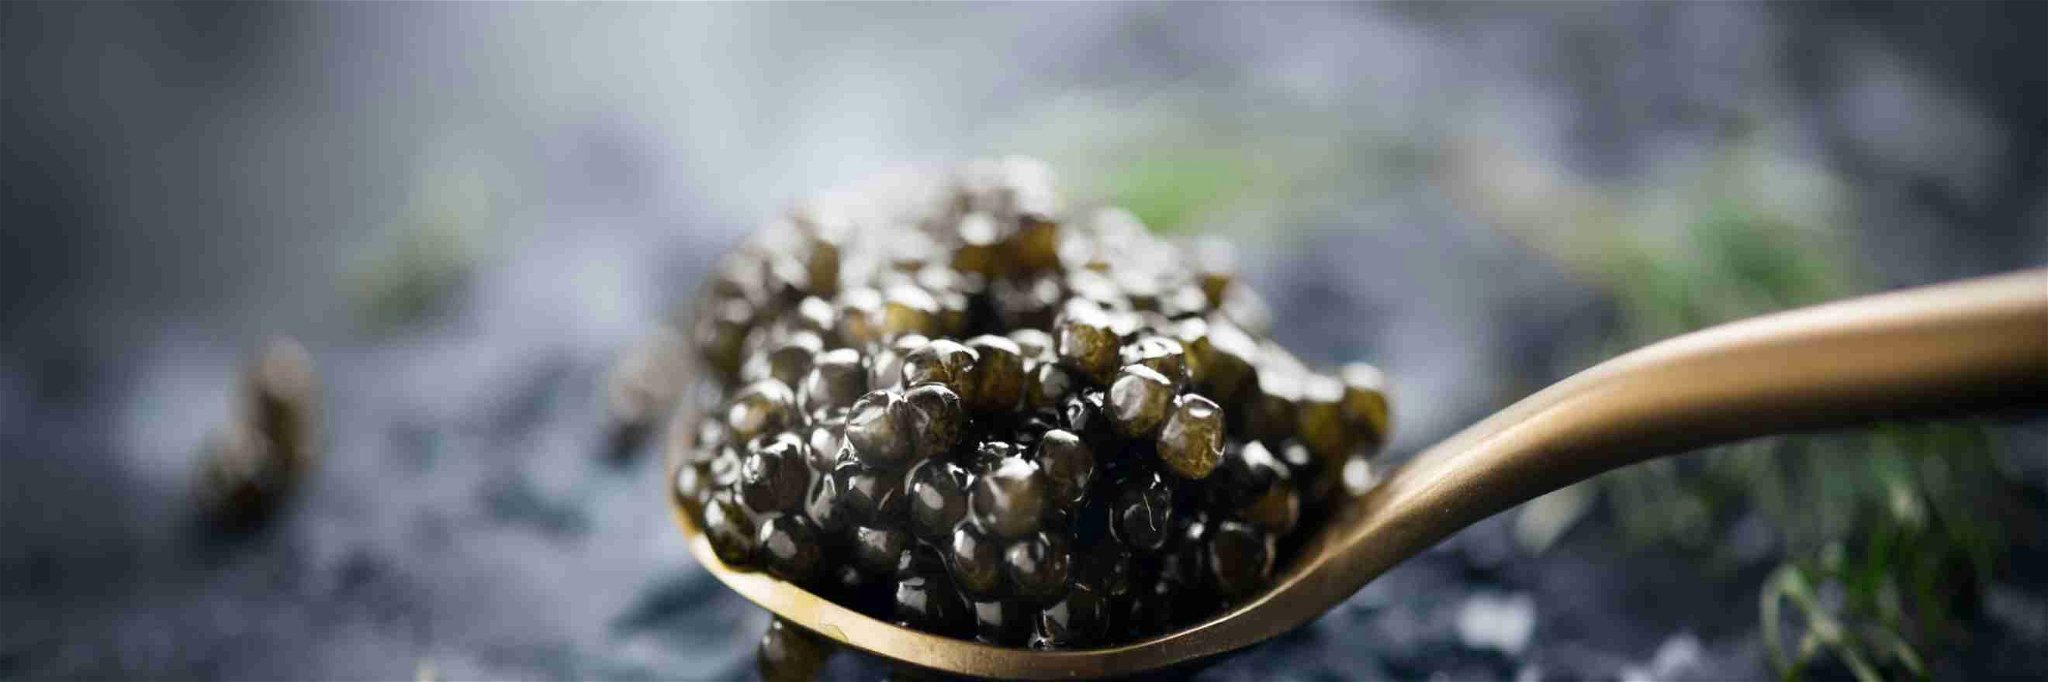 If there's one food that is&nbsp;associated with pure luxury, it's caviar.&nbsp;